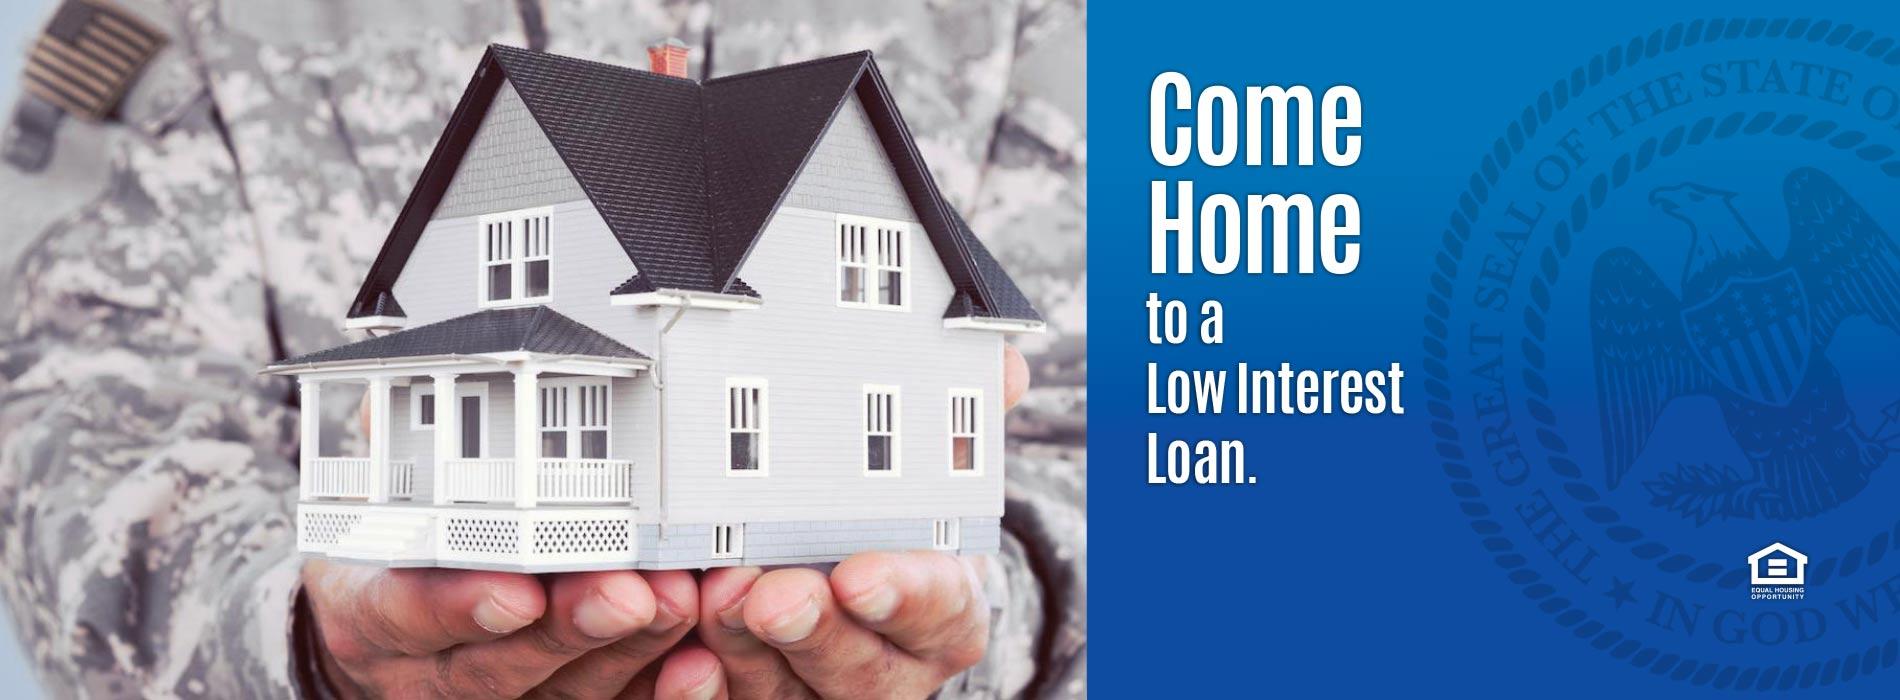 Come Home to a Low Interest Loan.